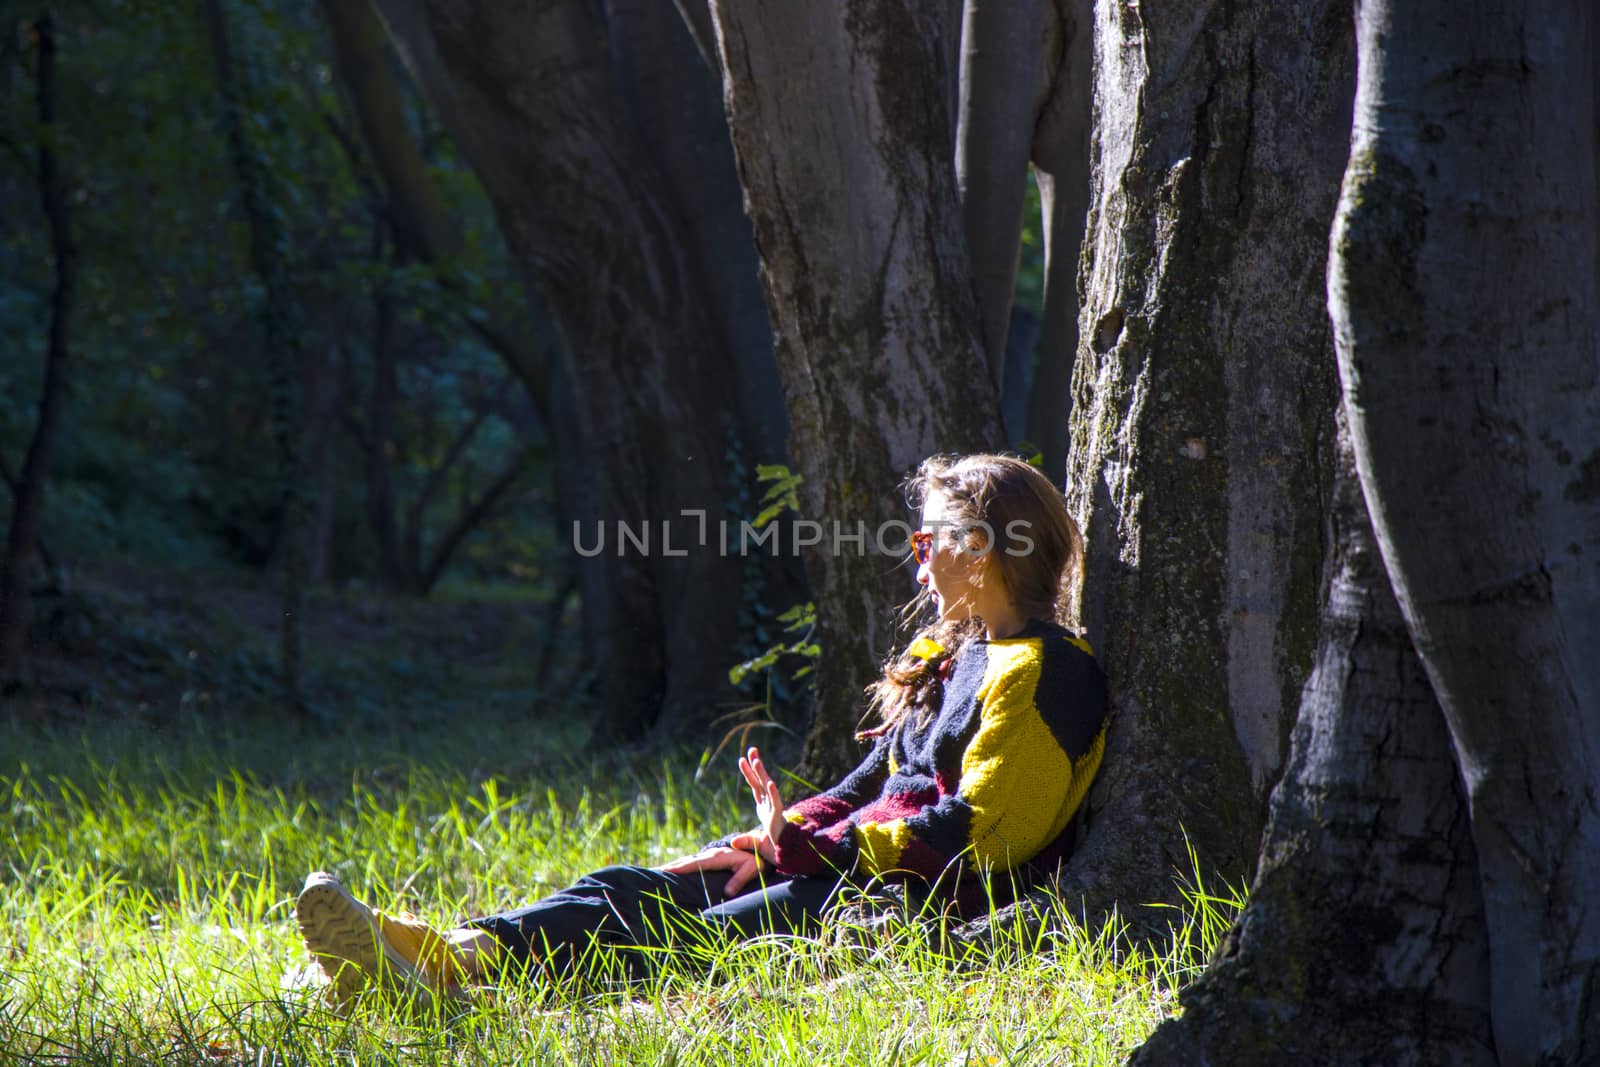 Woman in the botanic garden and park, trees and casual young girl portrait by Taidundua